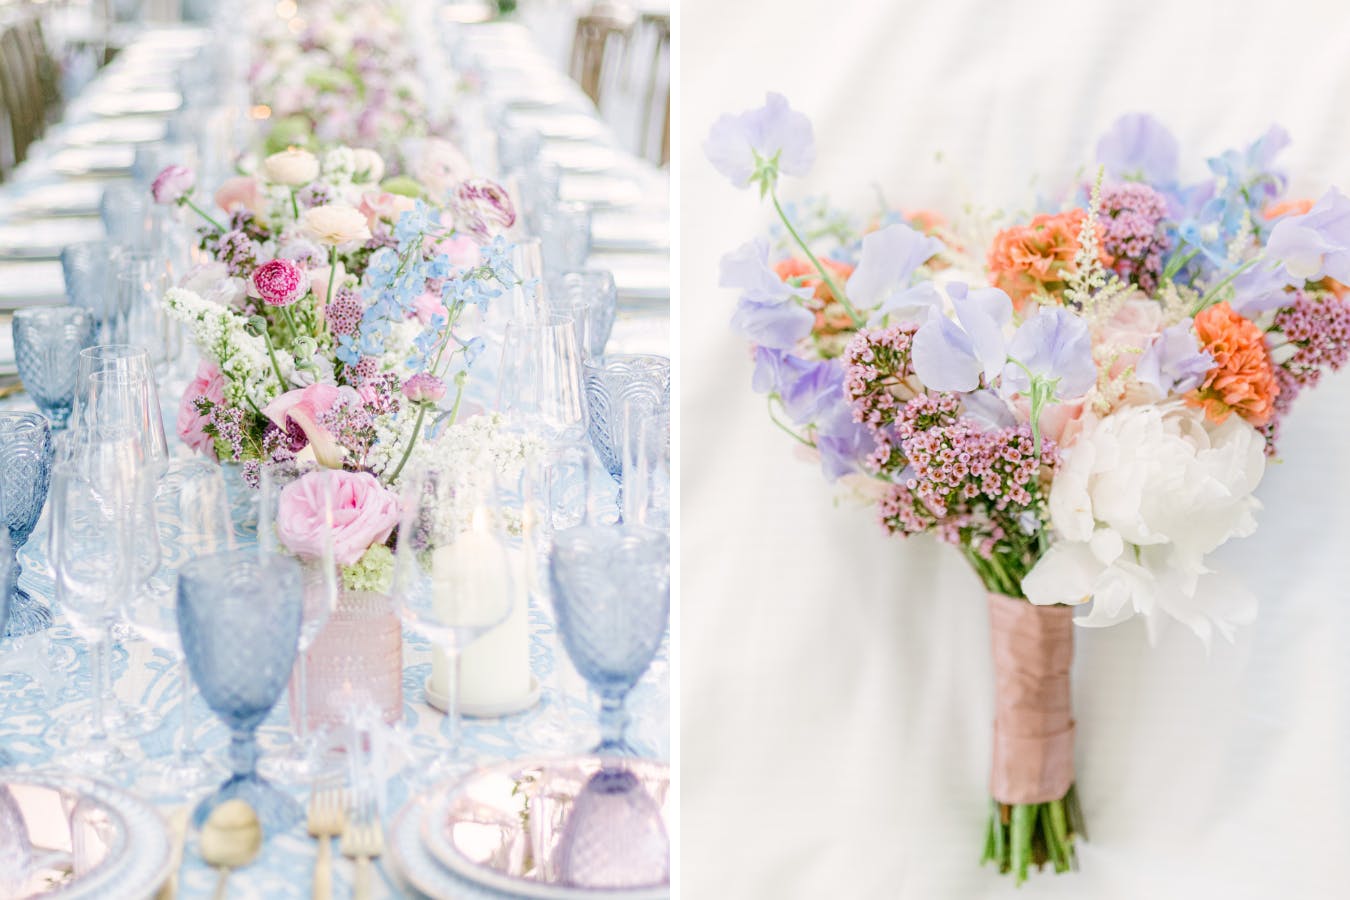 Soft spring florals and ice blue glassware combine to create a picture-perfect tablescape for al fresco dining. | PartySlate